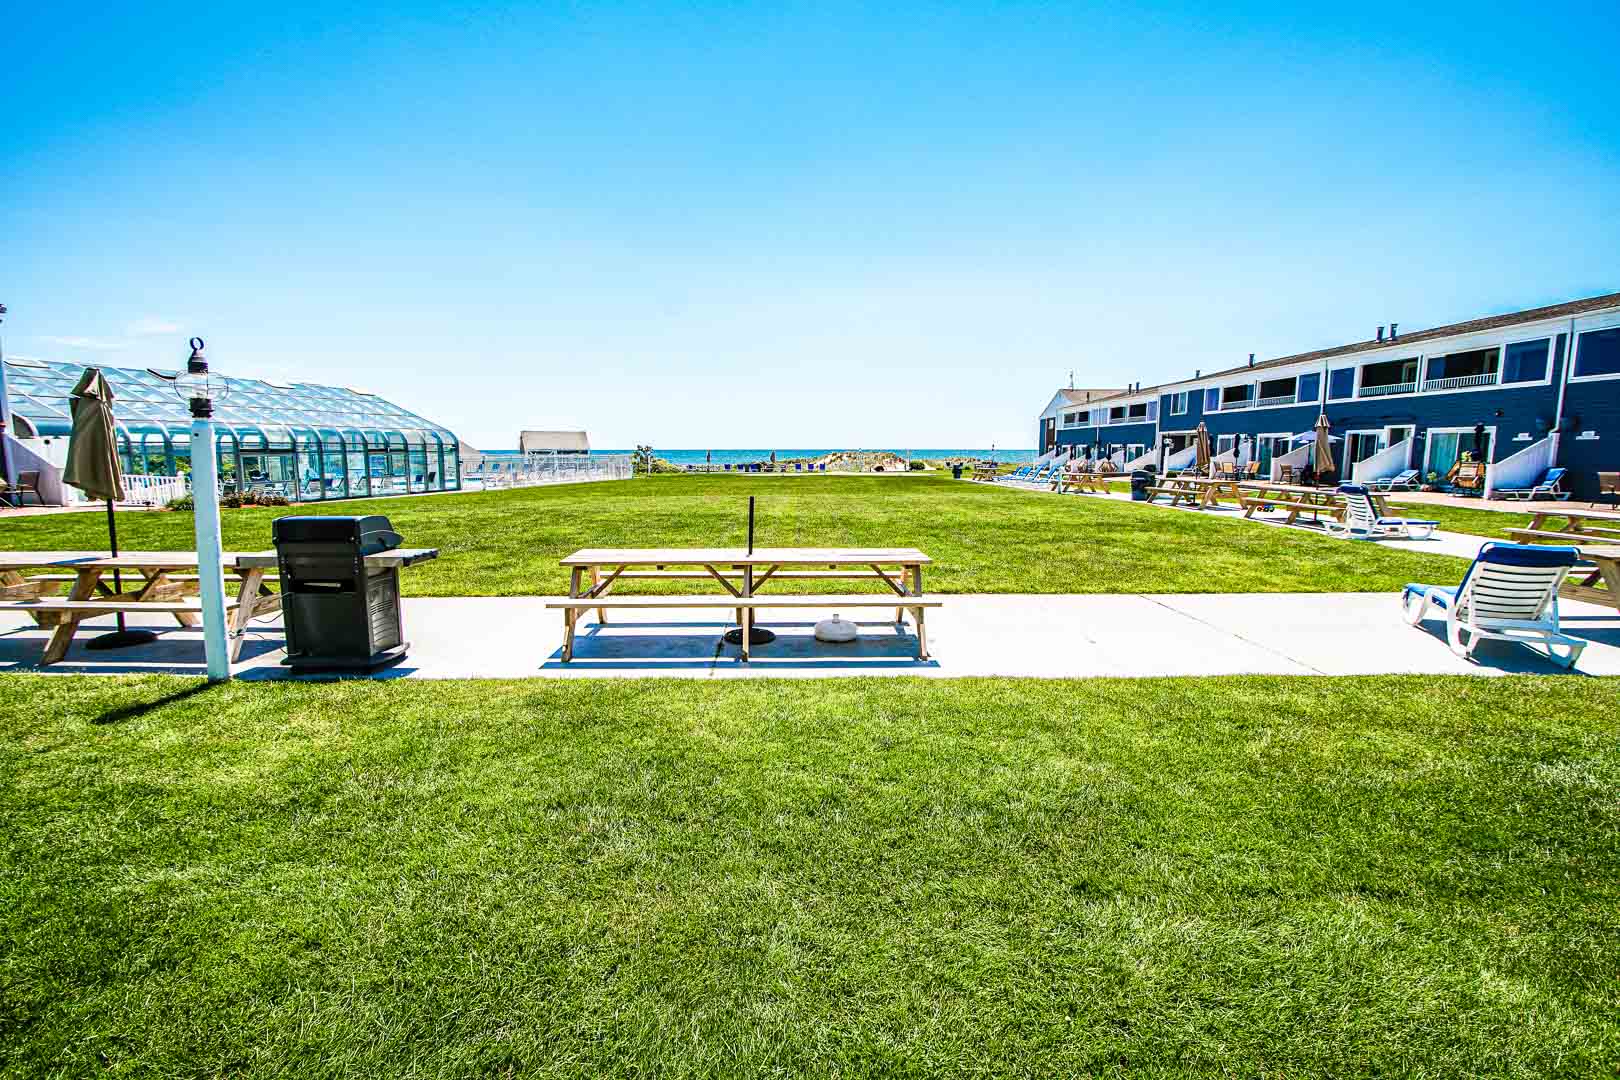 BBQ grills available in the patio area at VRI's Edgewater Beach Resort in Massachusetts.